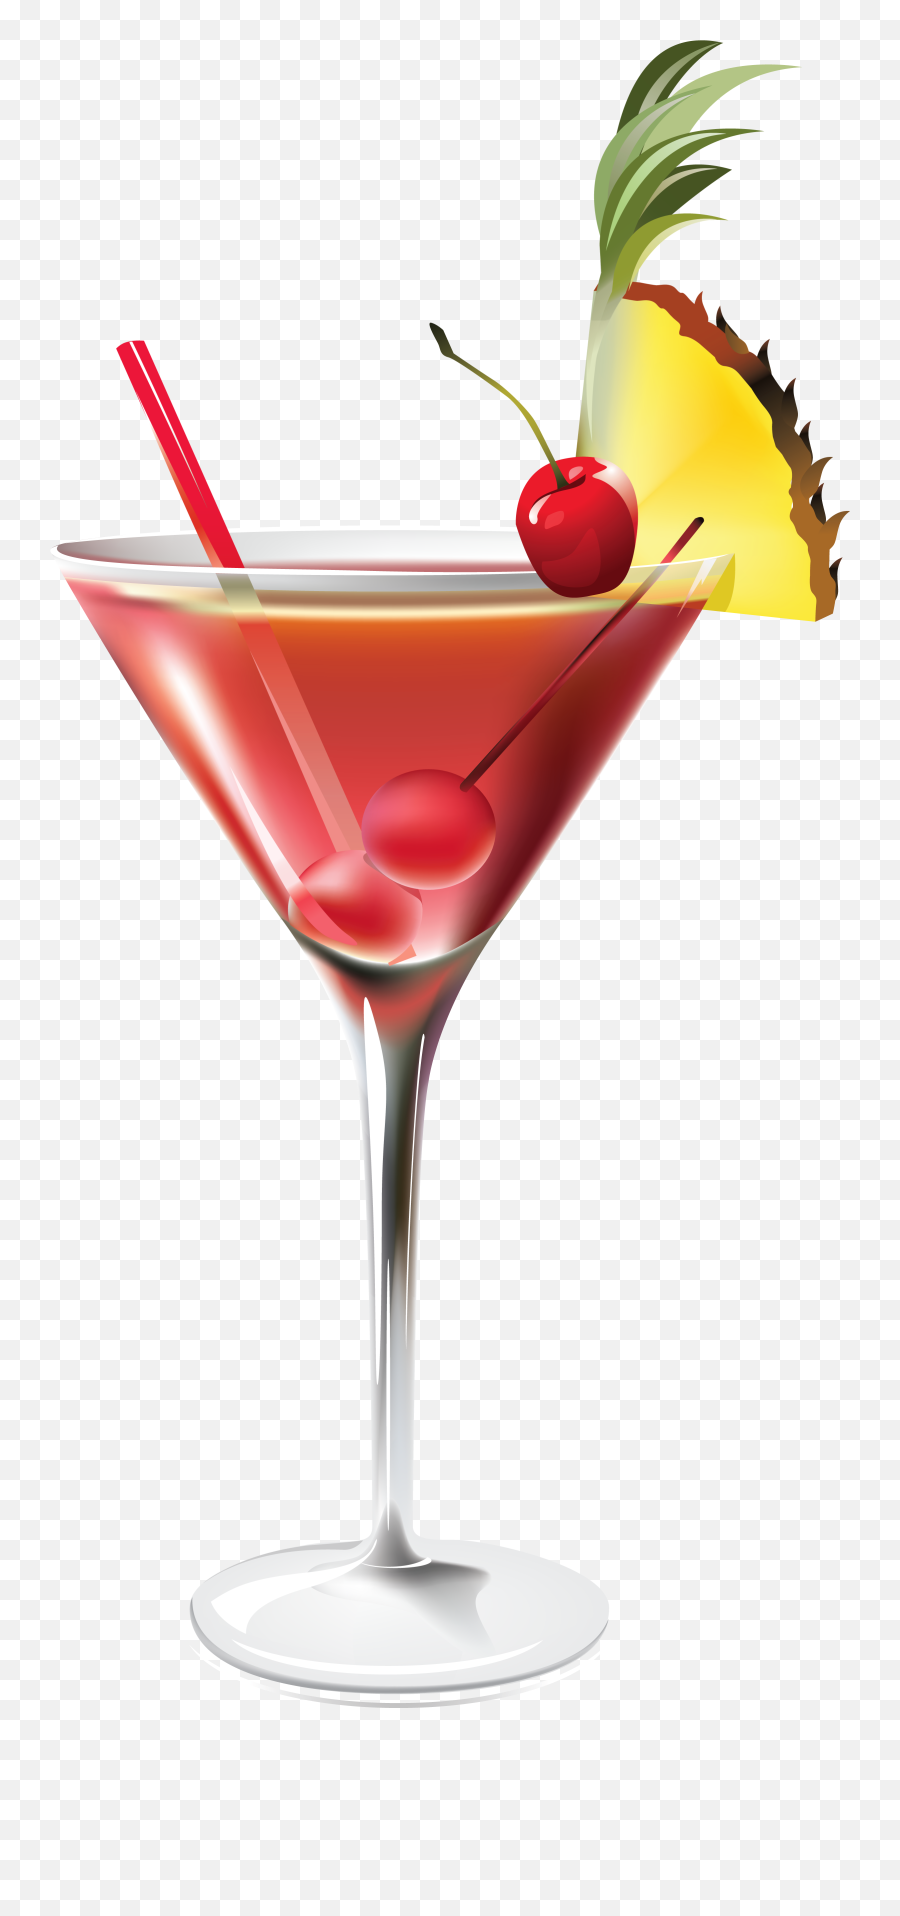 Cocktail Png Image Clip Art Cocktails Clipart Cocktails Emoji,Guess The Emoji Martini Glass And Party